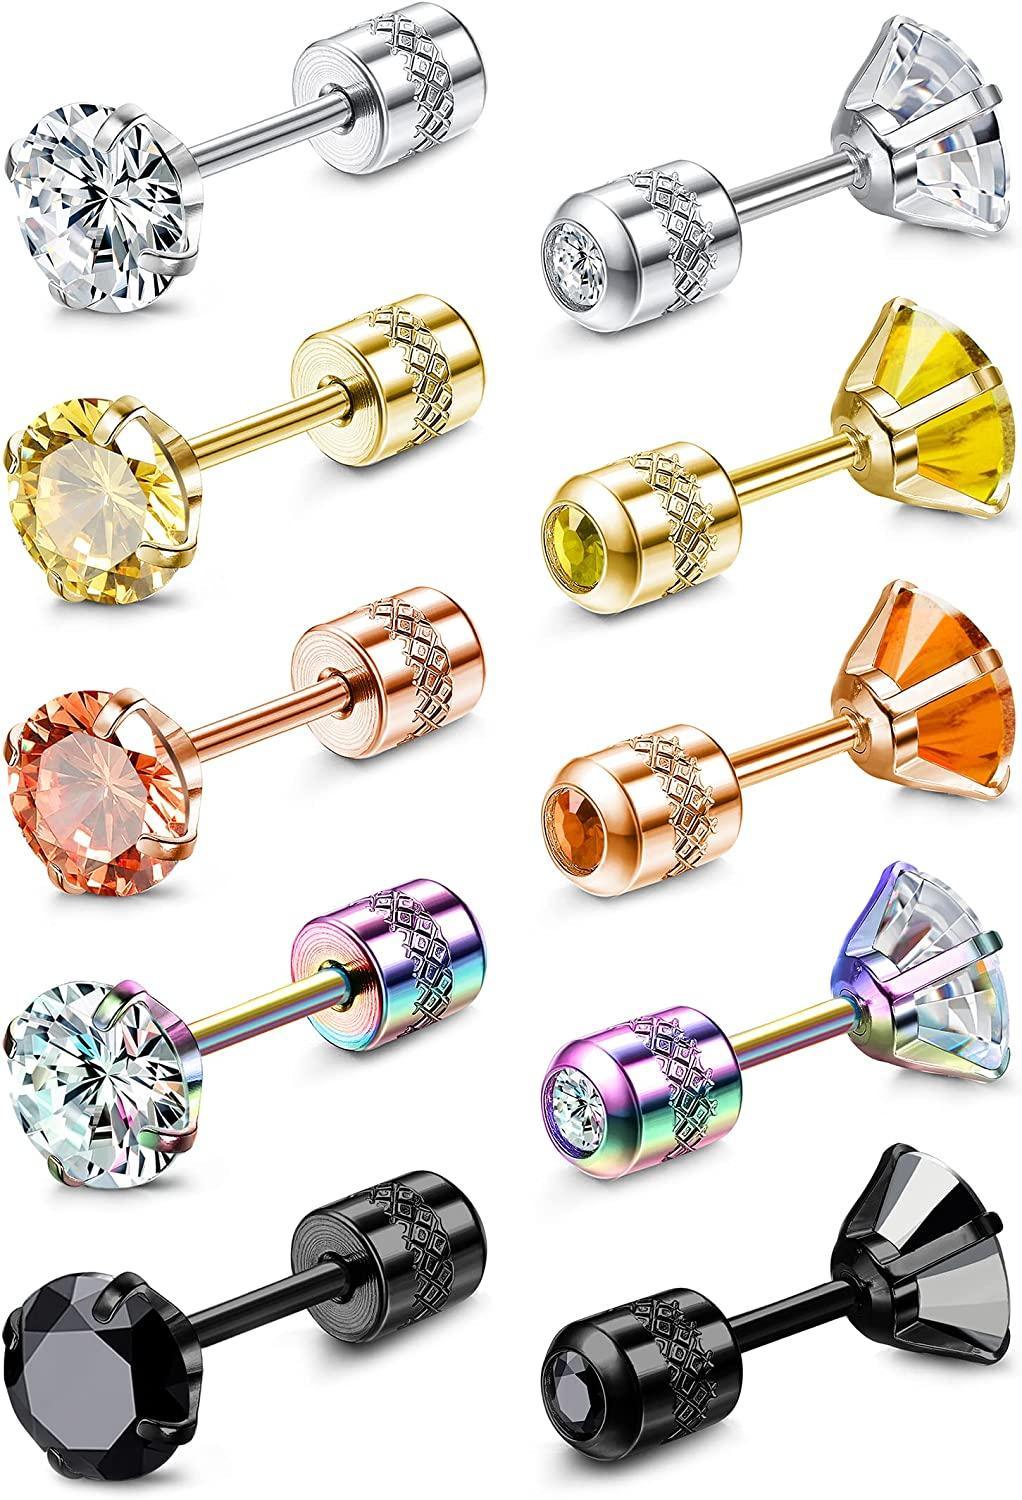 Assorted 5 Pairs Stud Earrings Set For Women Men in various colors and metal finishes, including silver, gold, rose gold, and black, each featuring a single cubic zirconia.